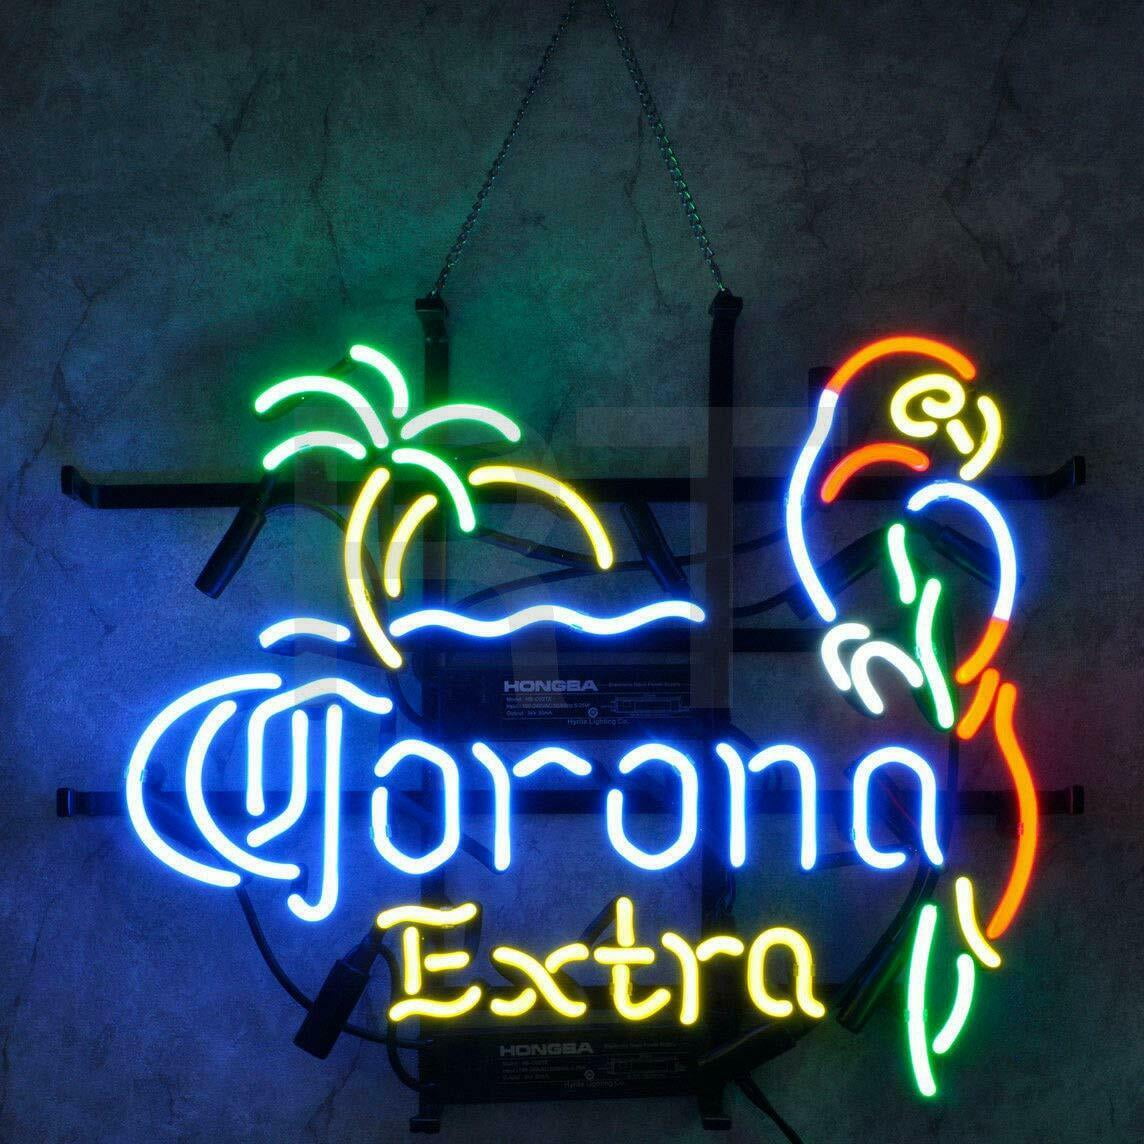 Large Corona Beer Neon Image Refrigerator Tool Box  Magnet  NOT SIGNS 